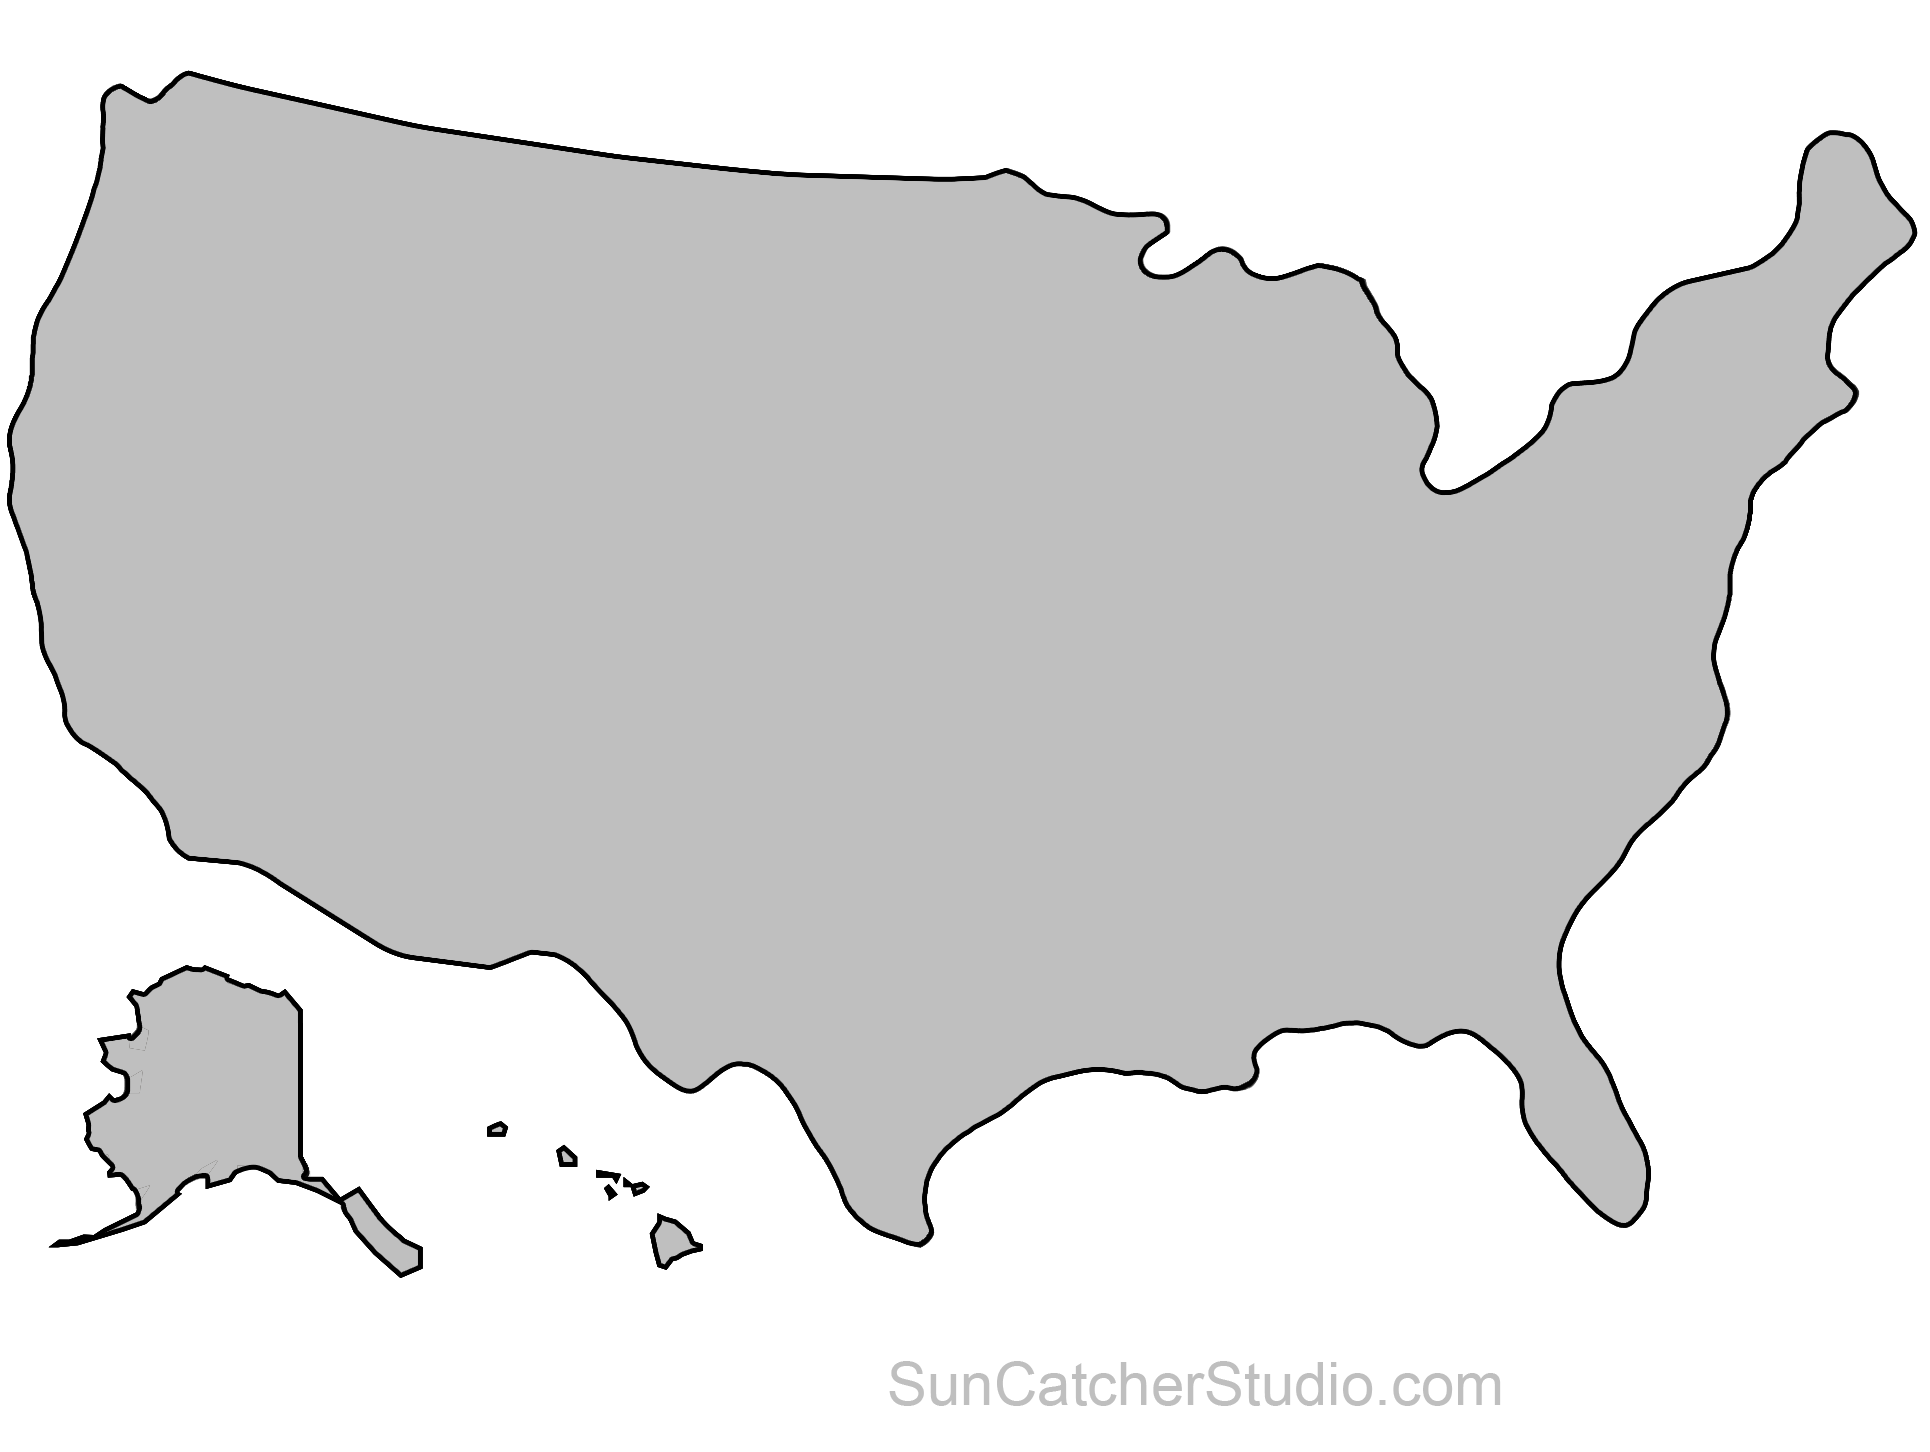 United states clipart printable. Country continents stencils puzzle